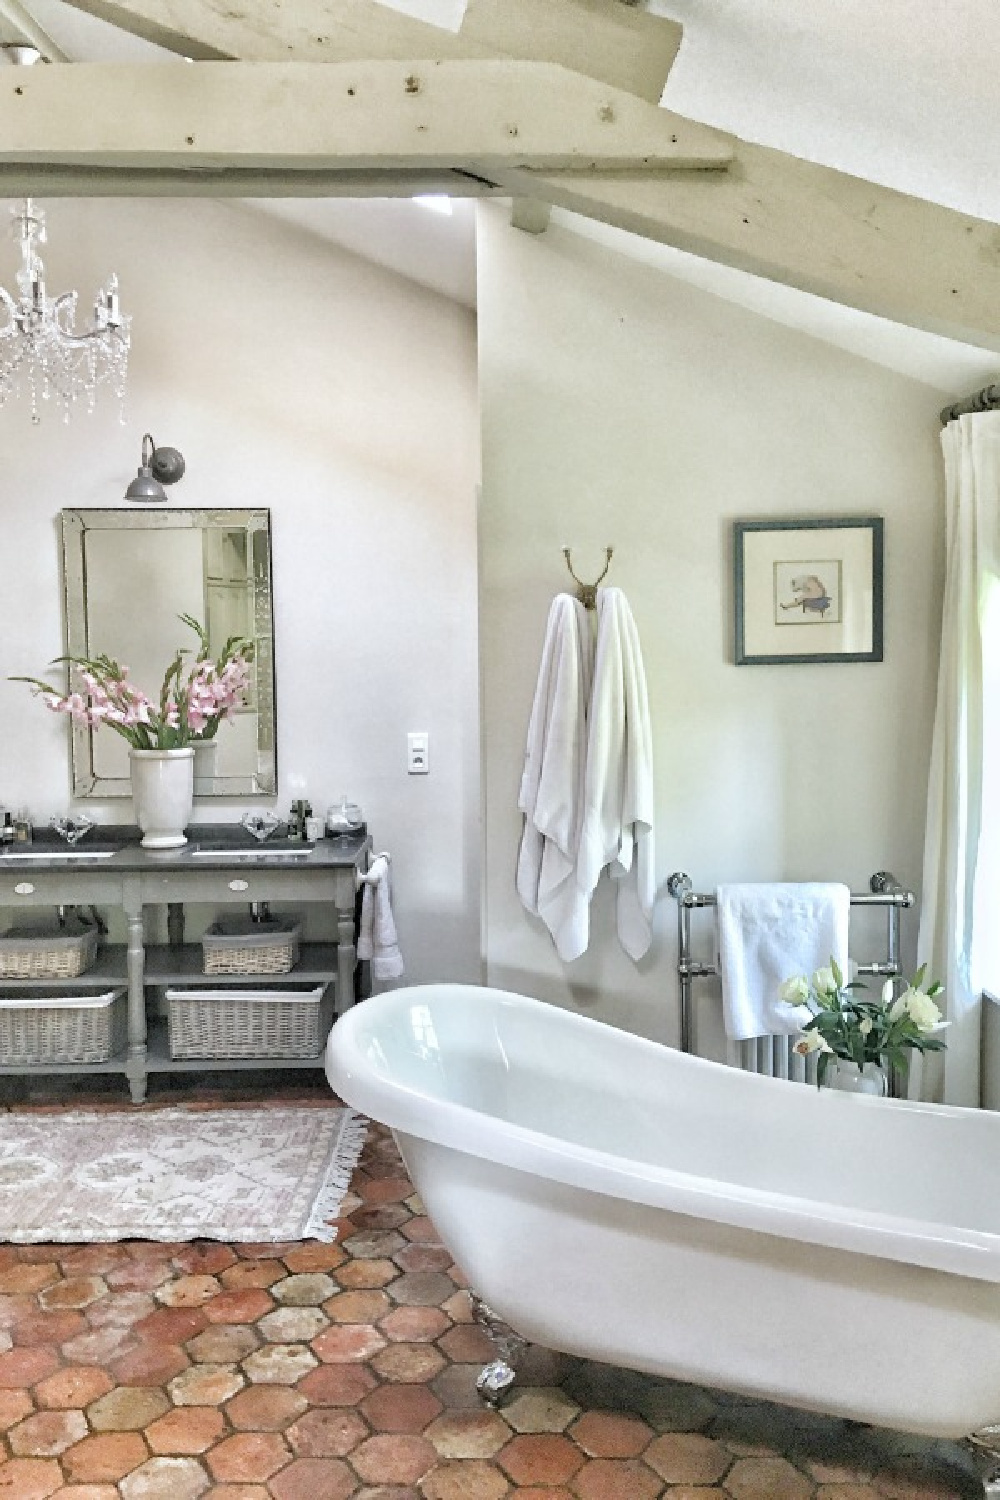 Farrow and Ball Strong White on walls in a French farmhouse bathroom with terracotta hex tile and clawfoot tub. Vivi et Margot. #frenchbathroom #frenchcountrystyle